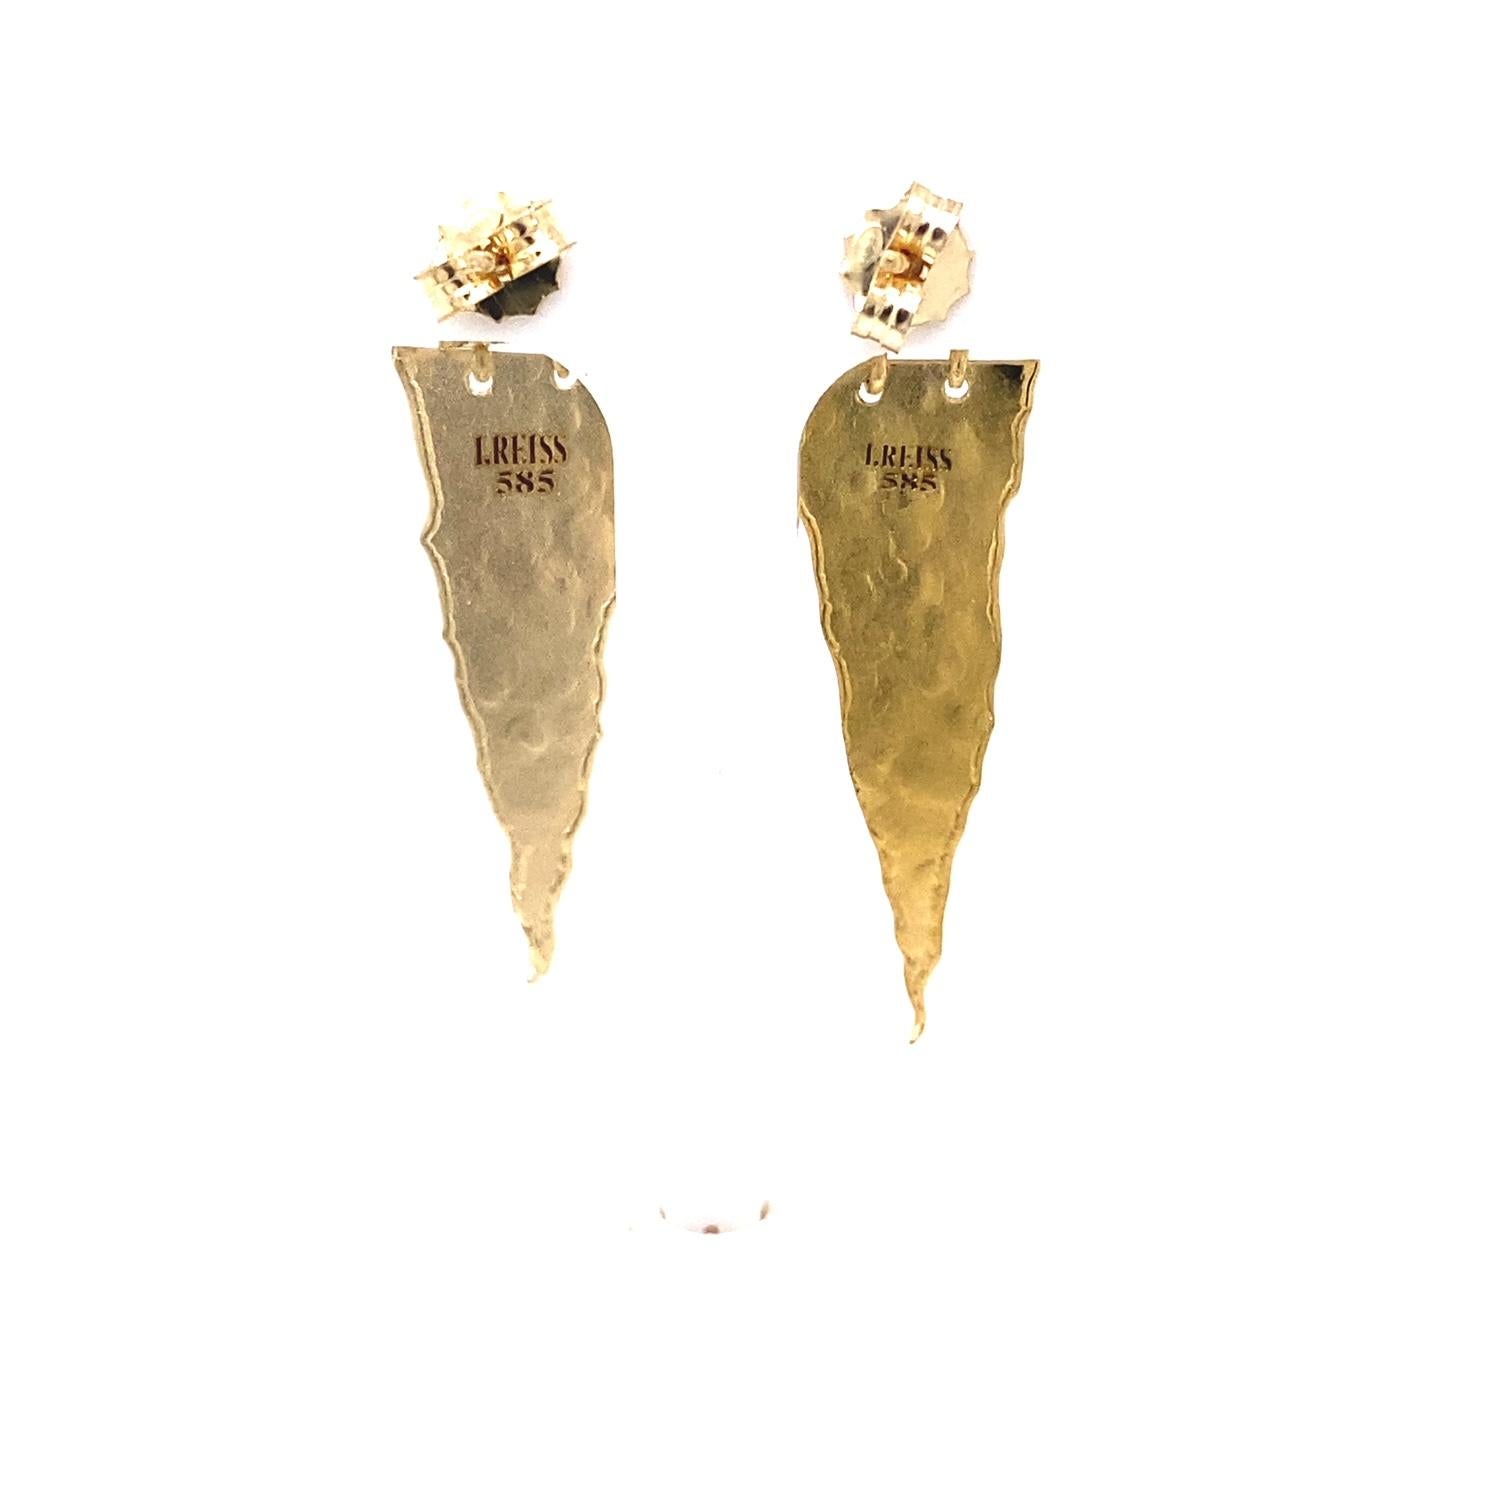 14 Karat Yellow Gold Matte  and Hammer-Finished Dangling Triangle Earrings, Accented with 0.18 Carats of Diamond Triangles and Set with a Post Closure.
